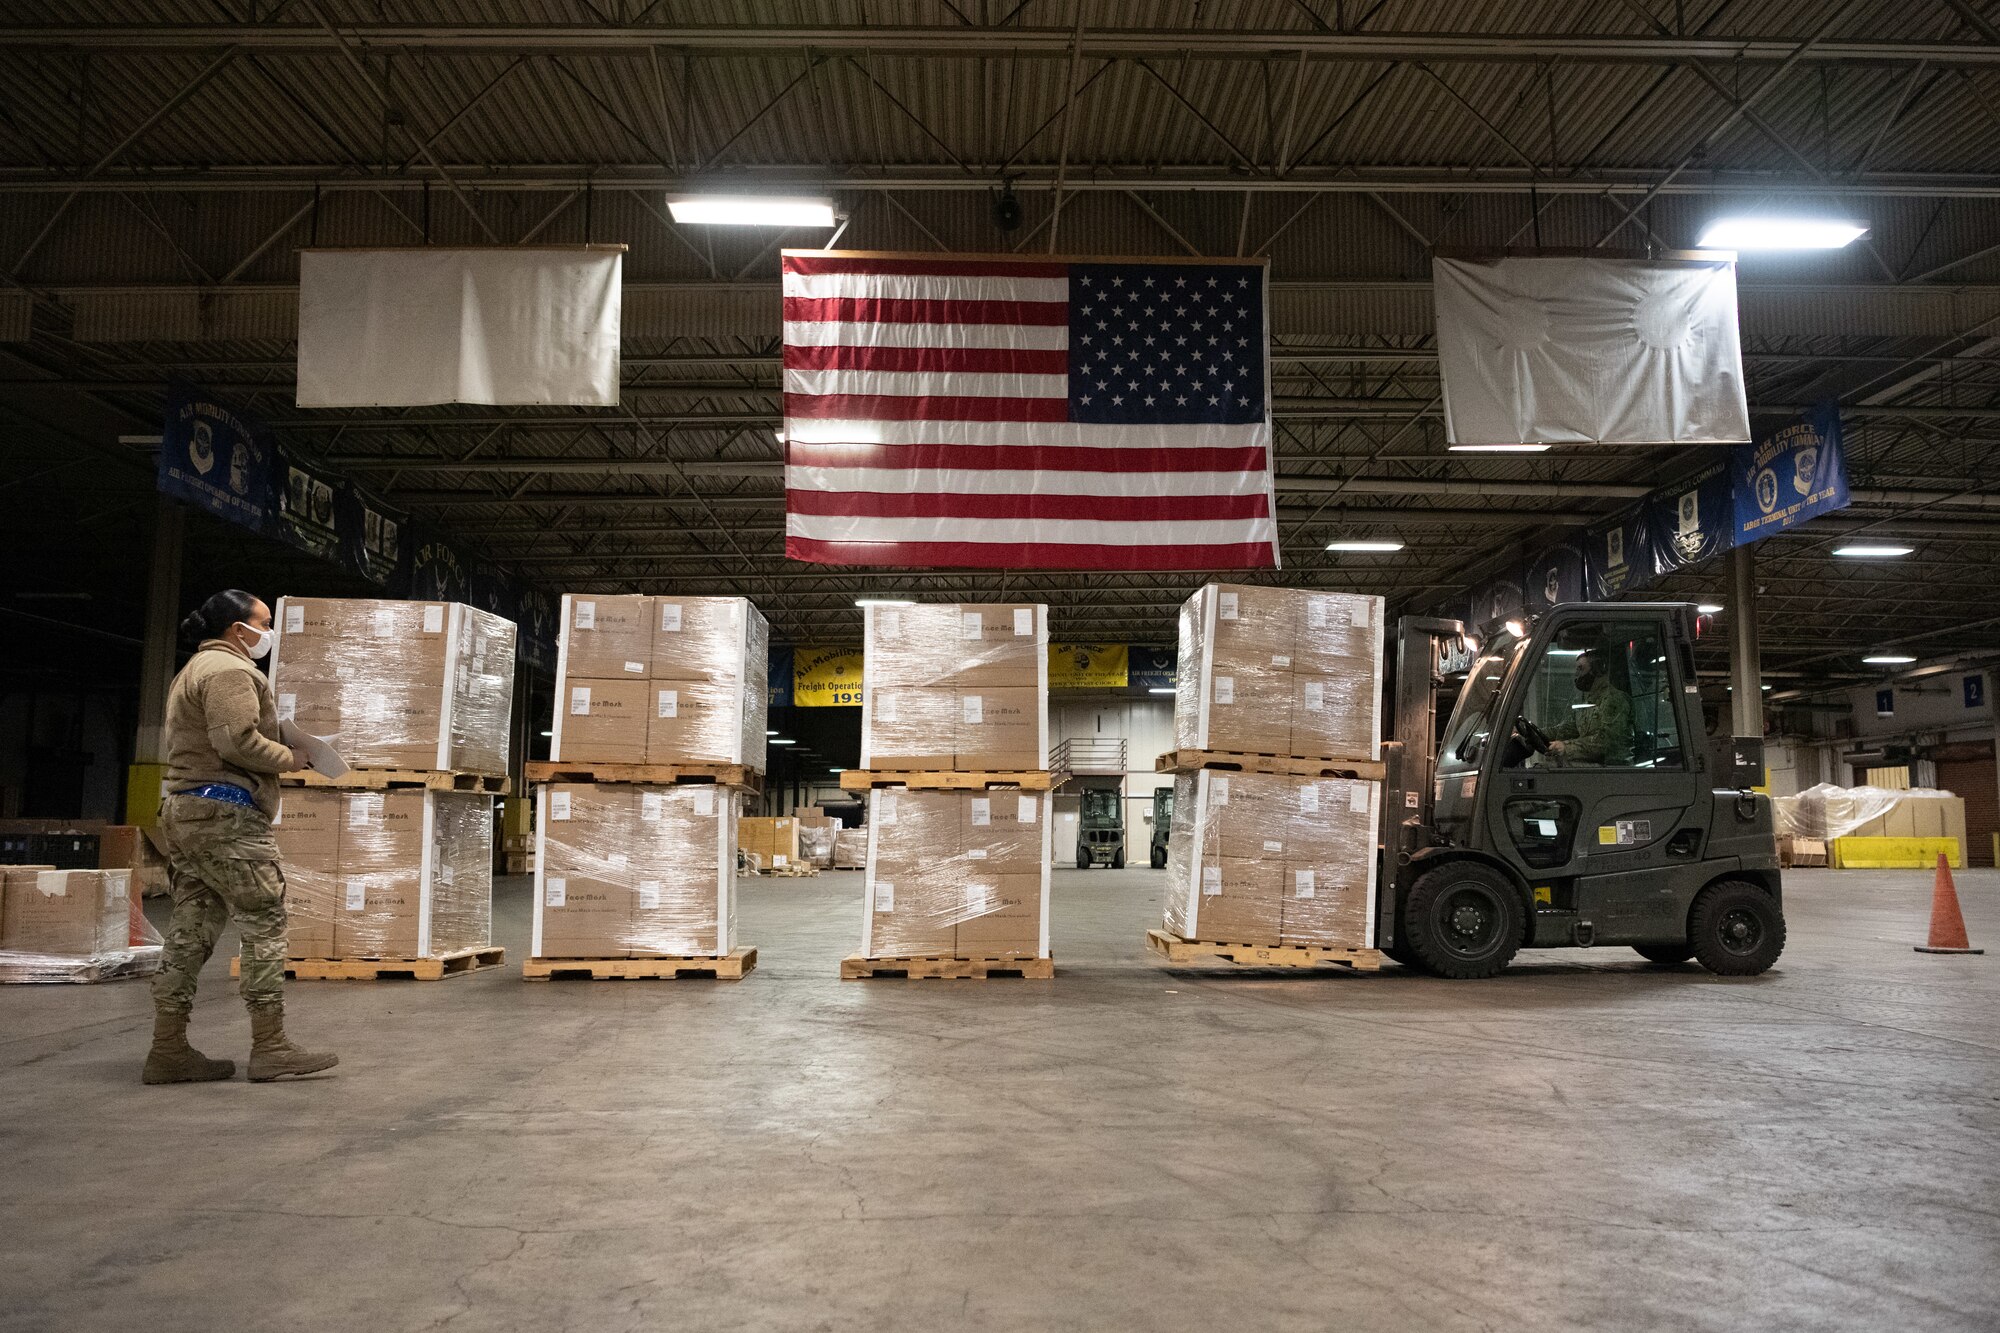 A fork lift is moving wood pallets from one place to another under a flag inside a warehouse.